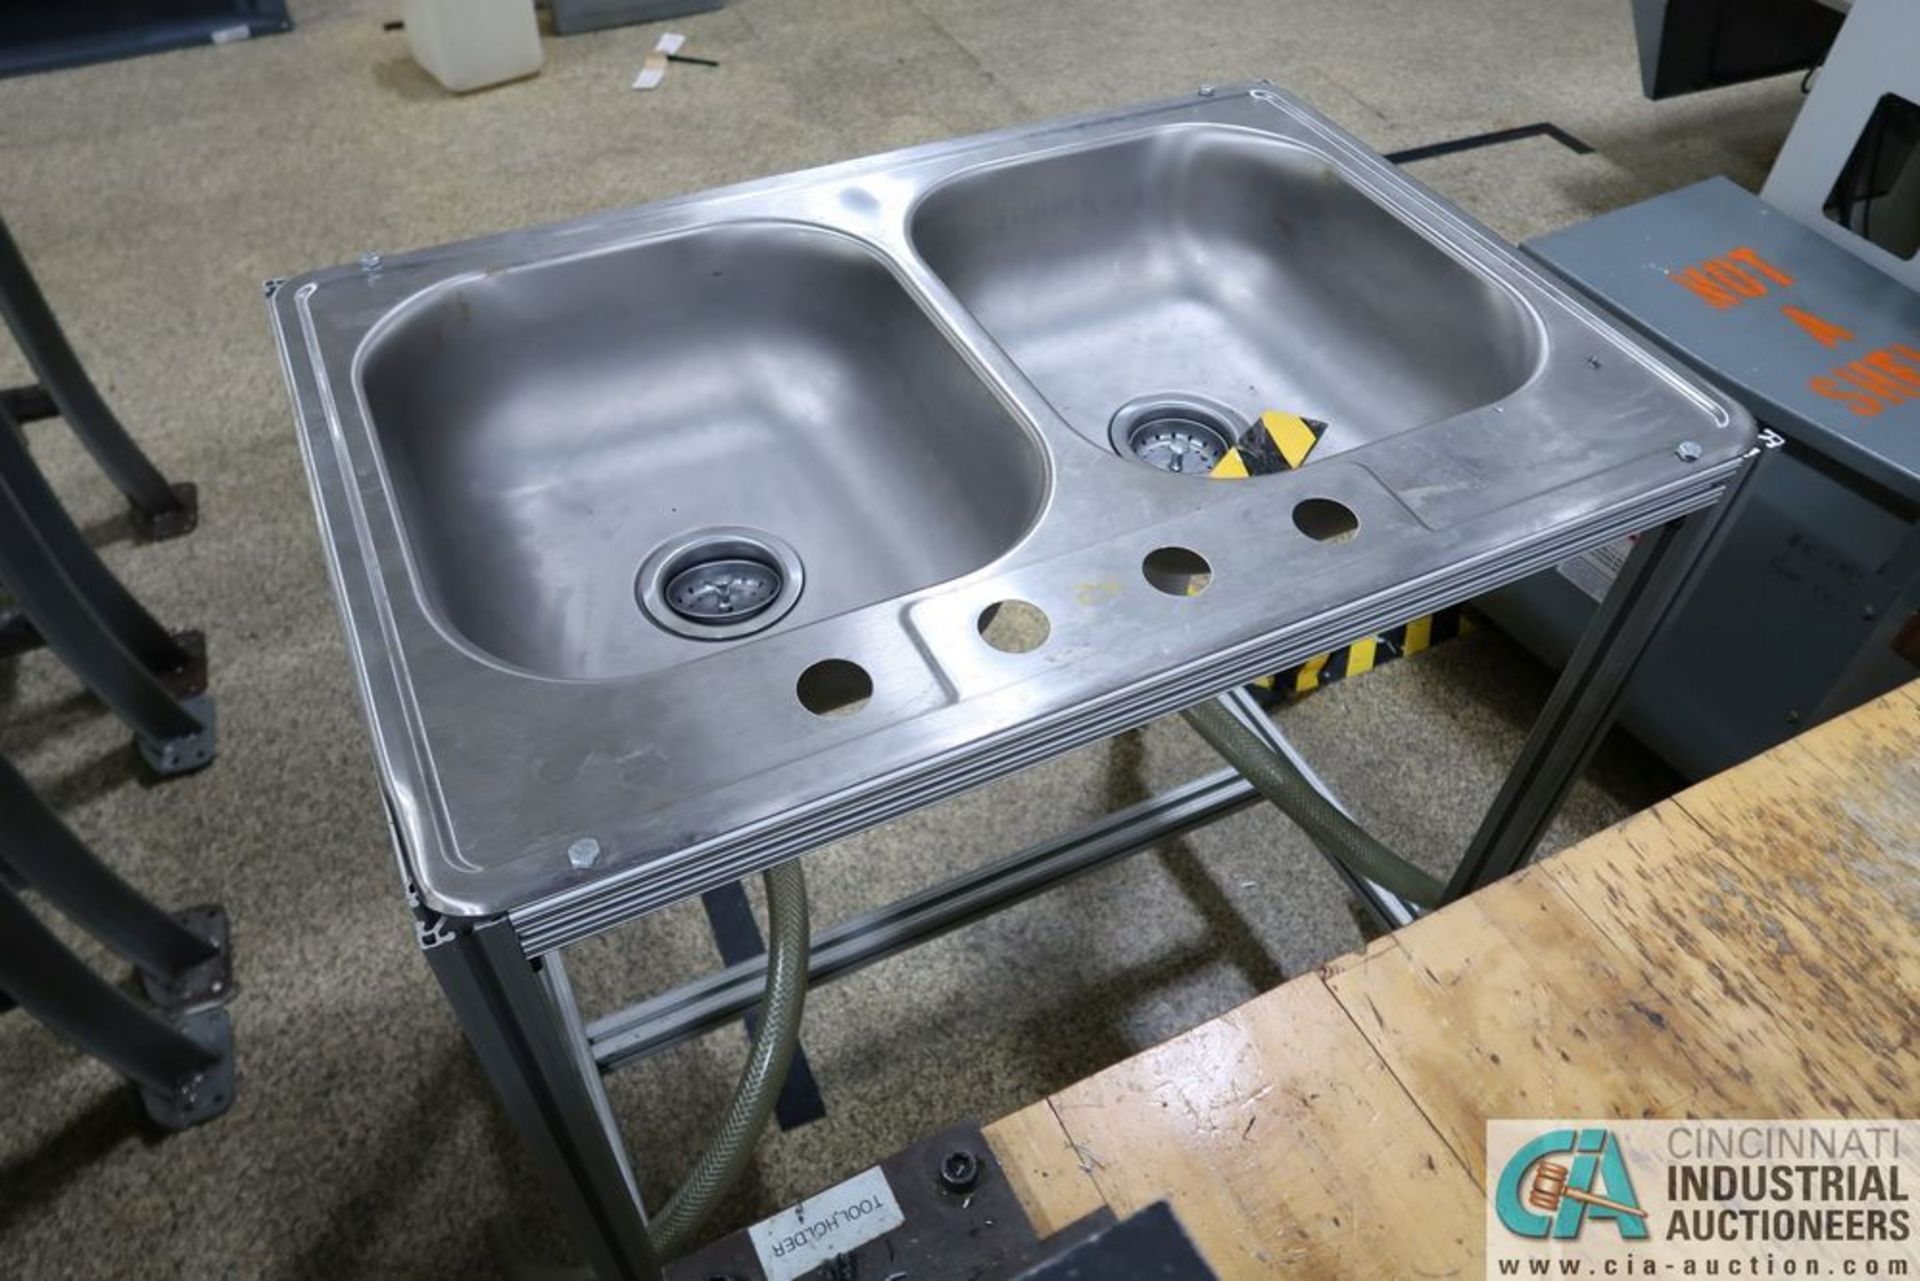 (LOT) 30" X 28" MAPLE TOP BENCH WITH TOOLHOLDER CLAMP AND PORTABLE 2-BOWL STAINLESS STEEL SINK - Image 4 of 4